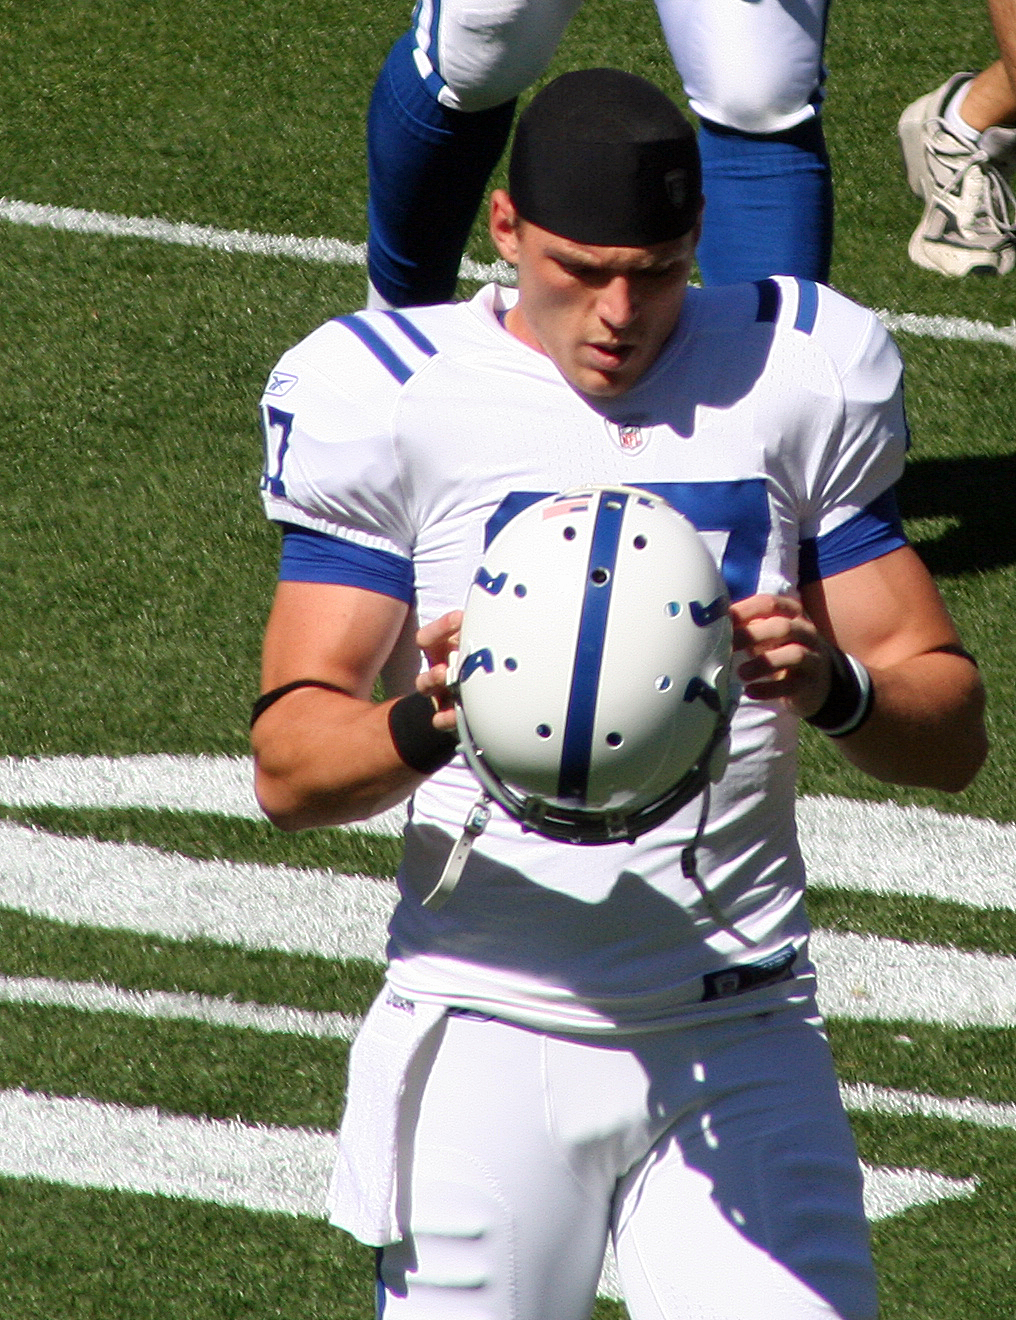 Best of College football players bulges